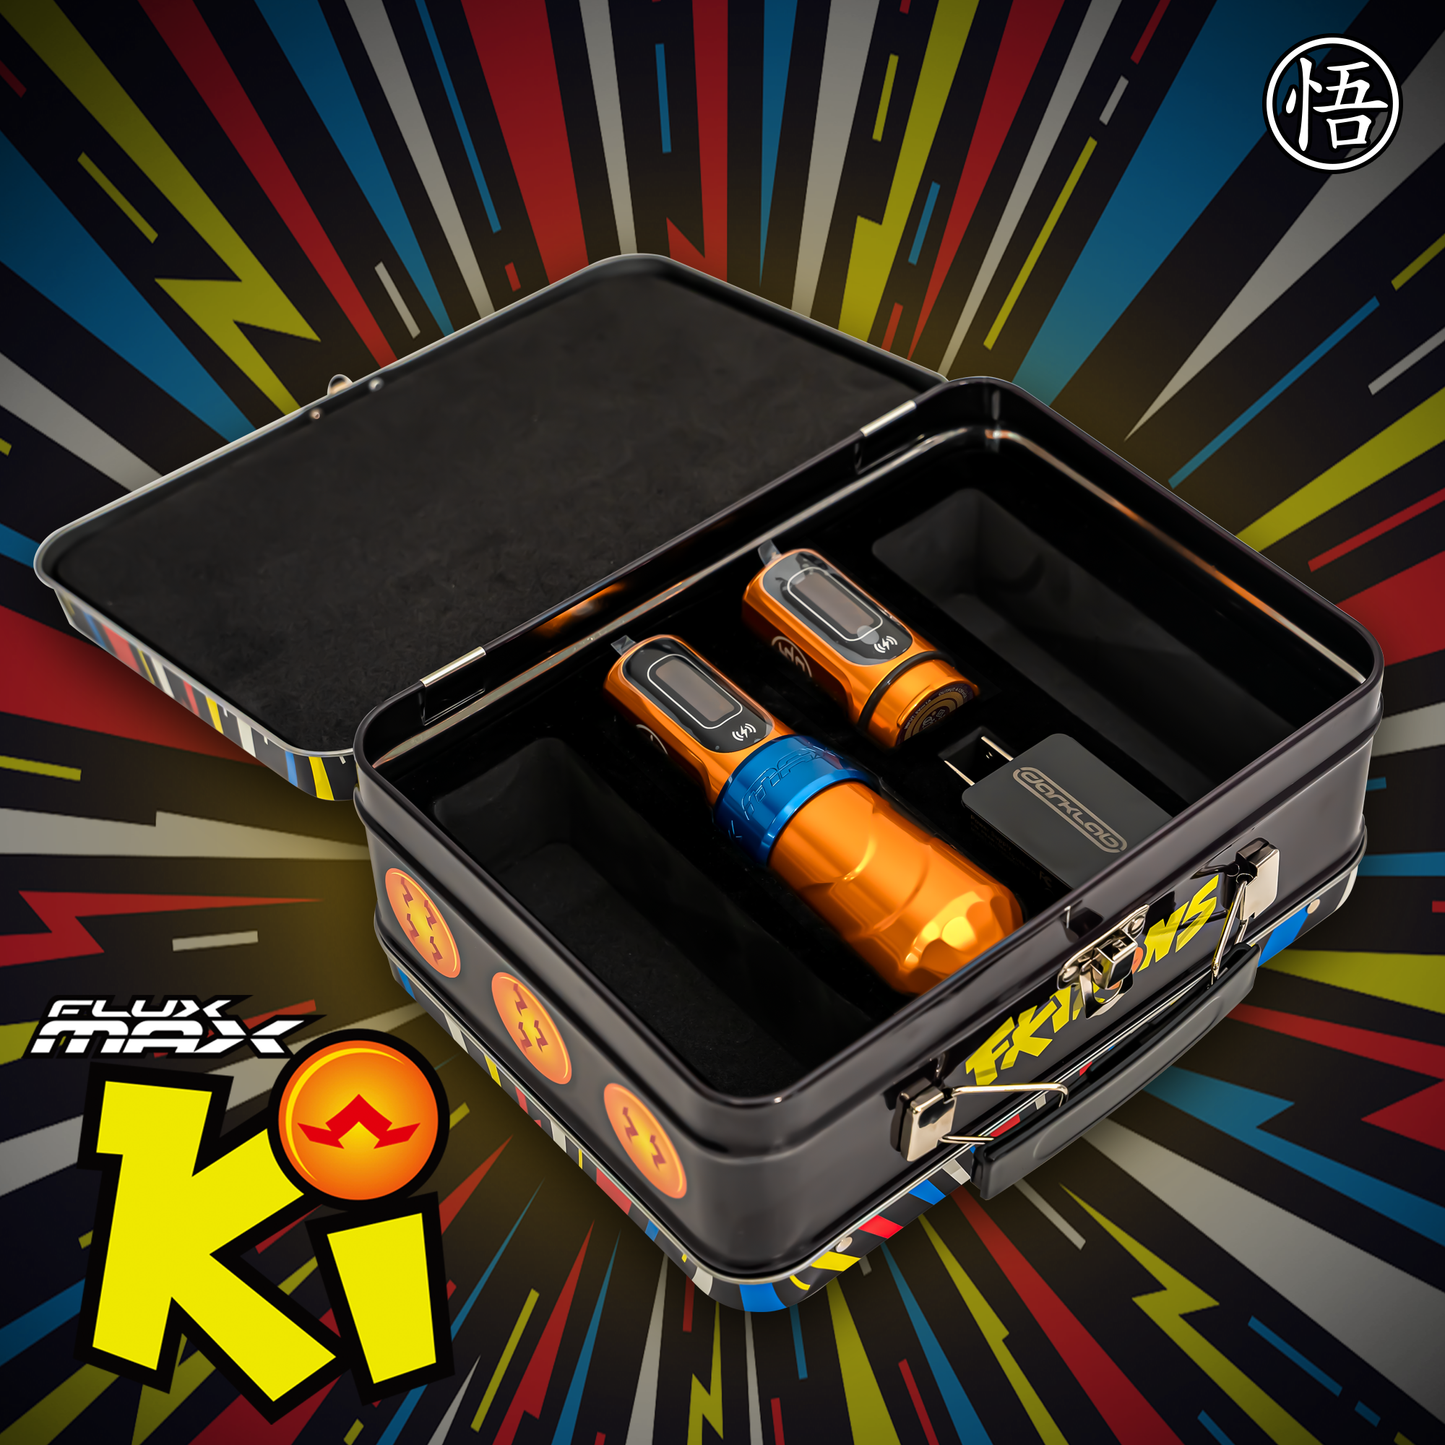 Flux Max Ki w/ 2 PowerBolts II and Lunch Box Case